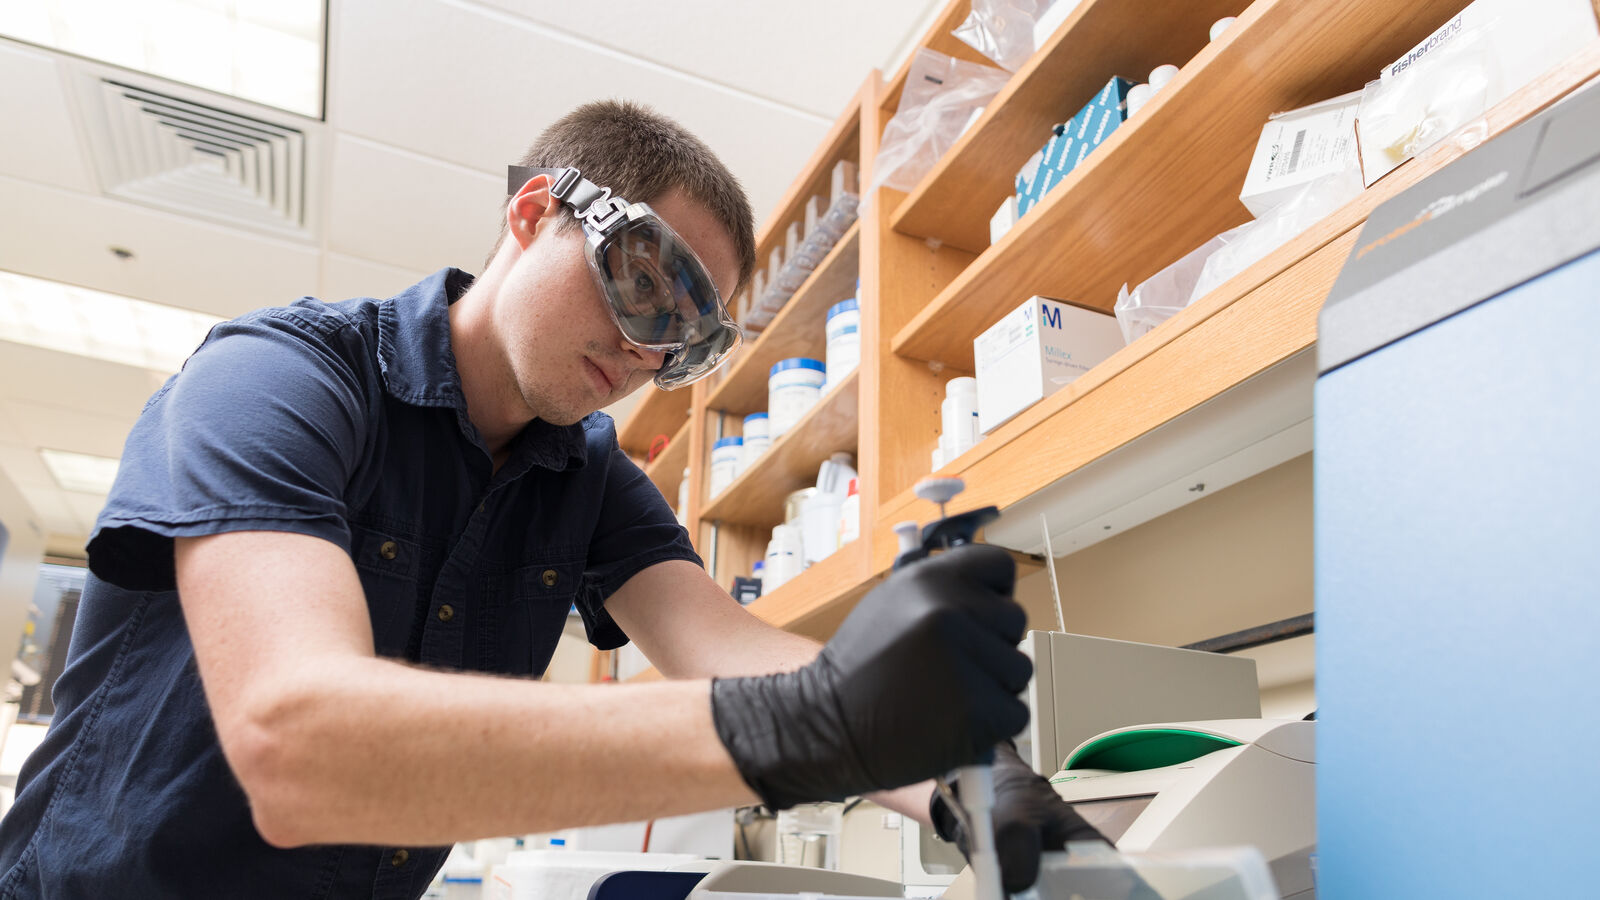 A male BS in Chemistry student at UT Tyler wearing safety glasses and gloves takes samples in a lab